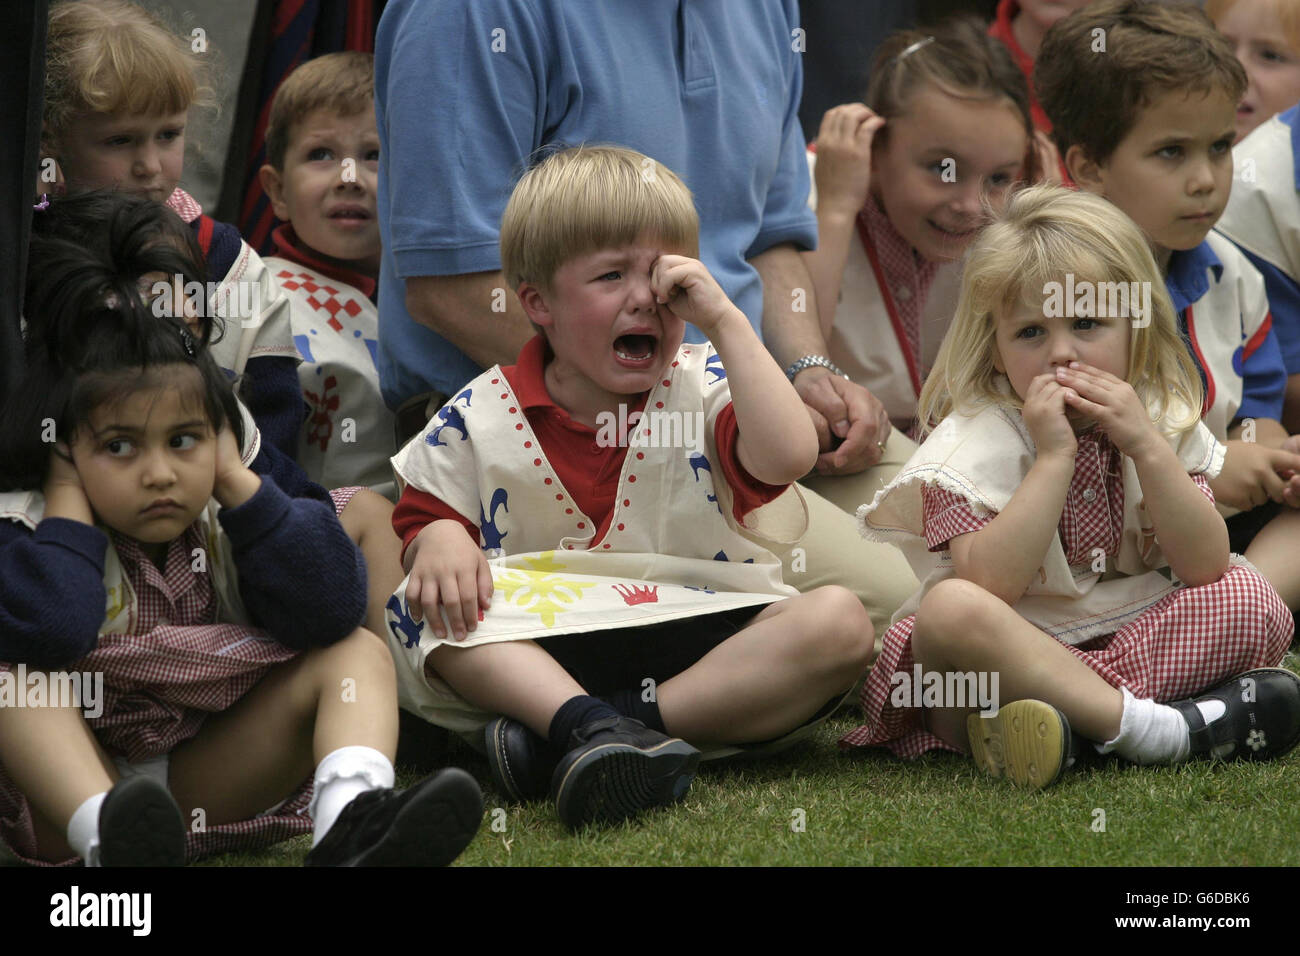 Henry, a three-year-old pupil at the Eagle House School nursery in Sandhurst, Berkshire, cries 'I don't like Prince Charles' as the Prince of Wales gives a speech. * Prince Charles was visiting the private school to attend a Tudor Fair to celebrate the opening of a replica 16th-Century house made with the help of the schoolchildren. Stock Photo